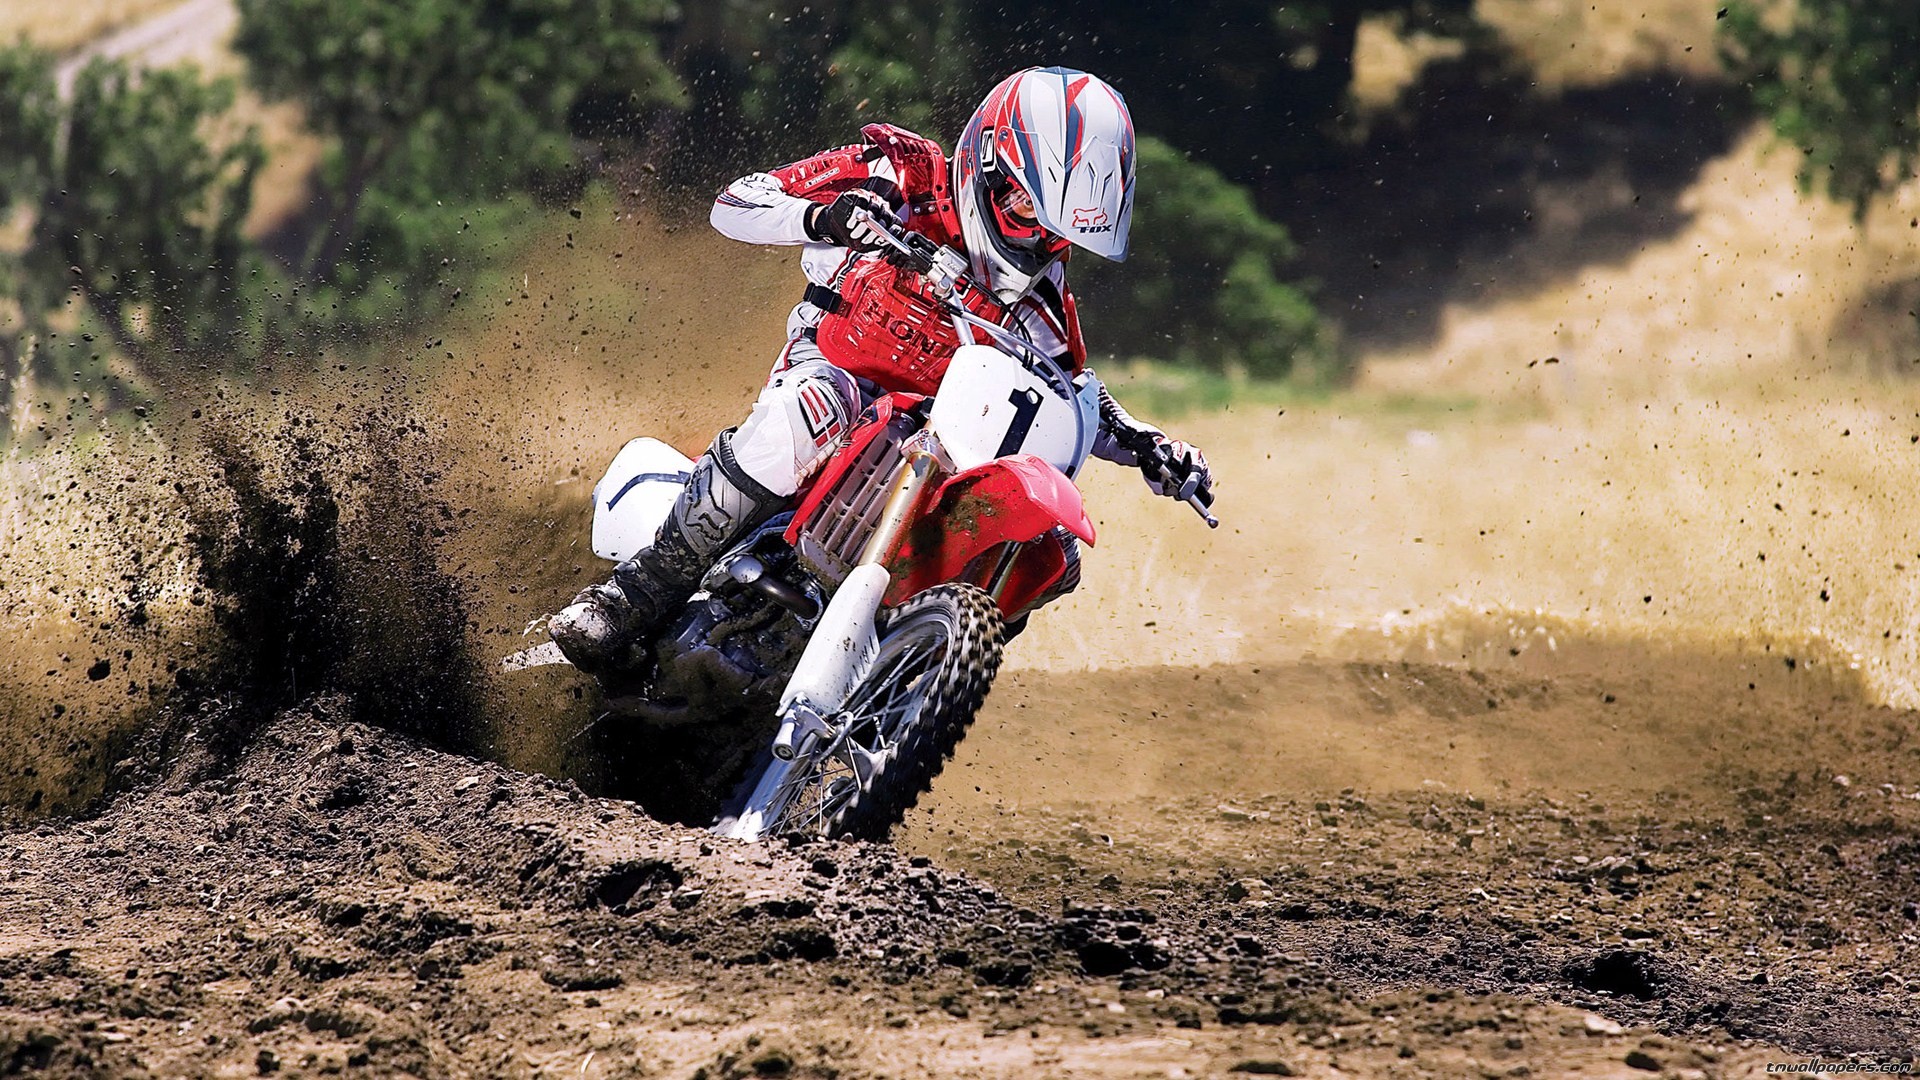 1920x1080 High Quality Motocross Picture wallpapers (33 Wallpapers)